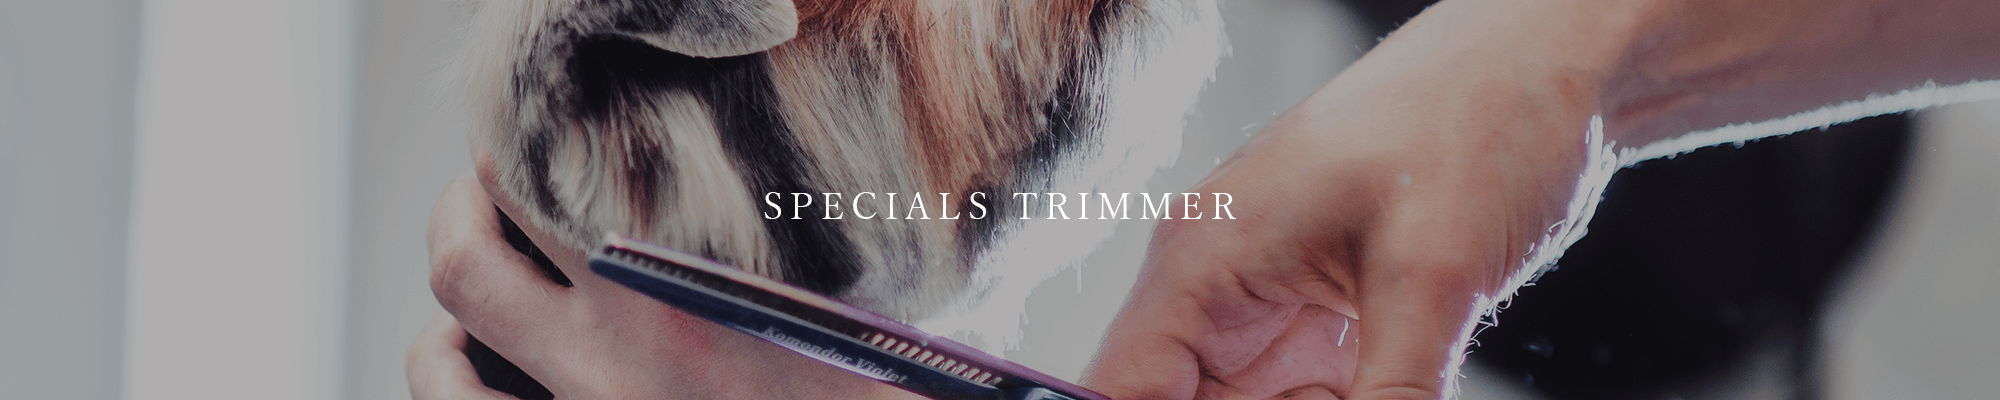 Specialis Trimmer